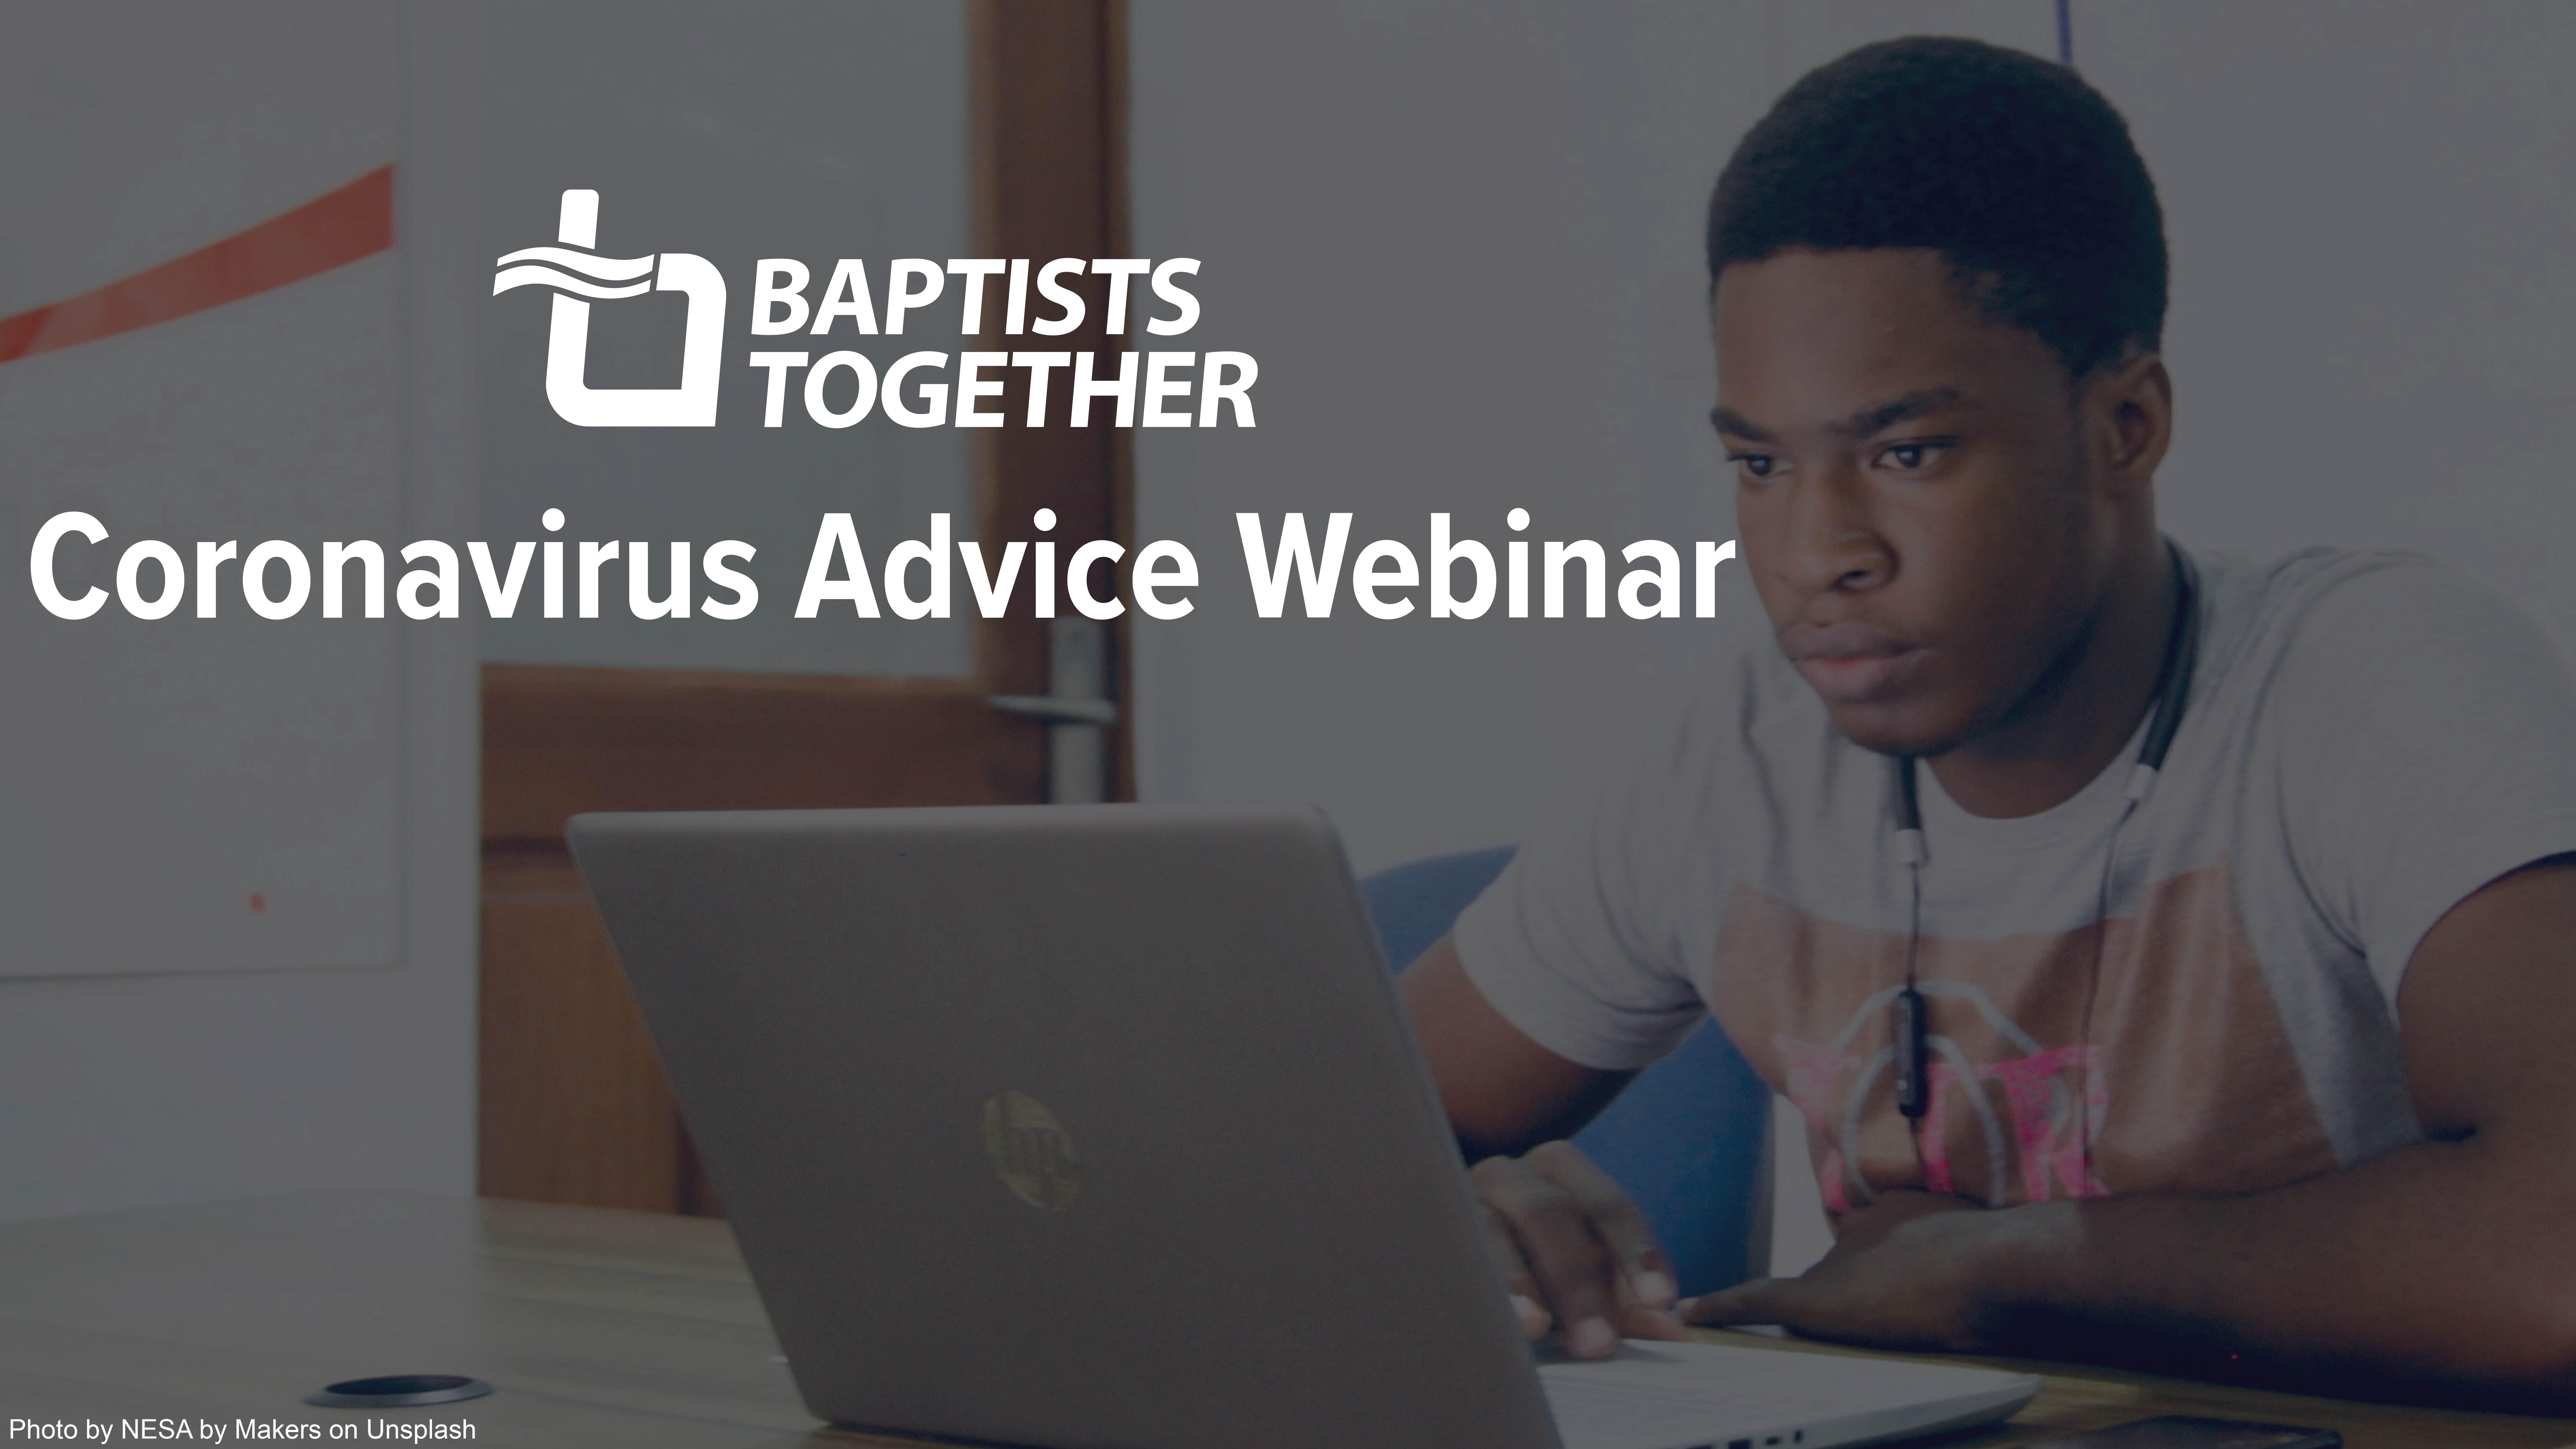 Coronavirus Advice Webinar: Video and streaming solutions for churches 15 July